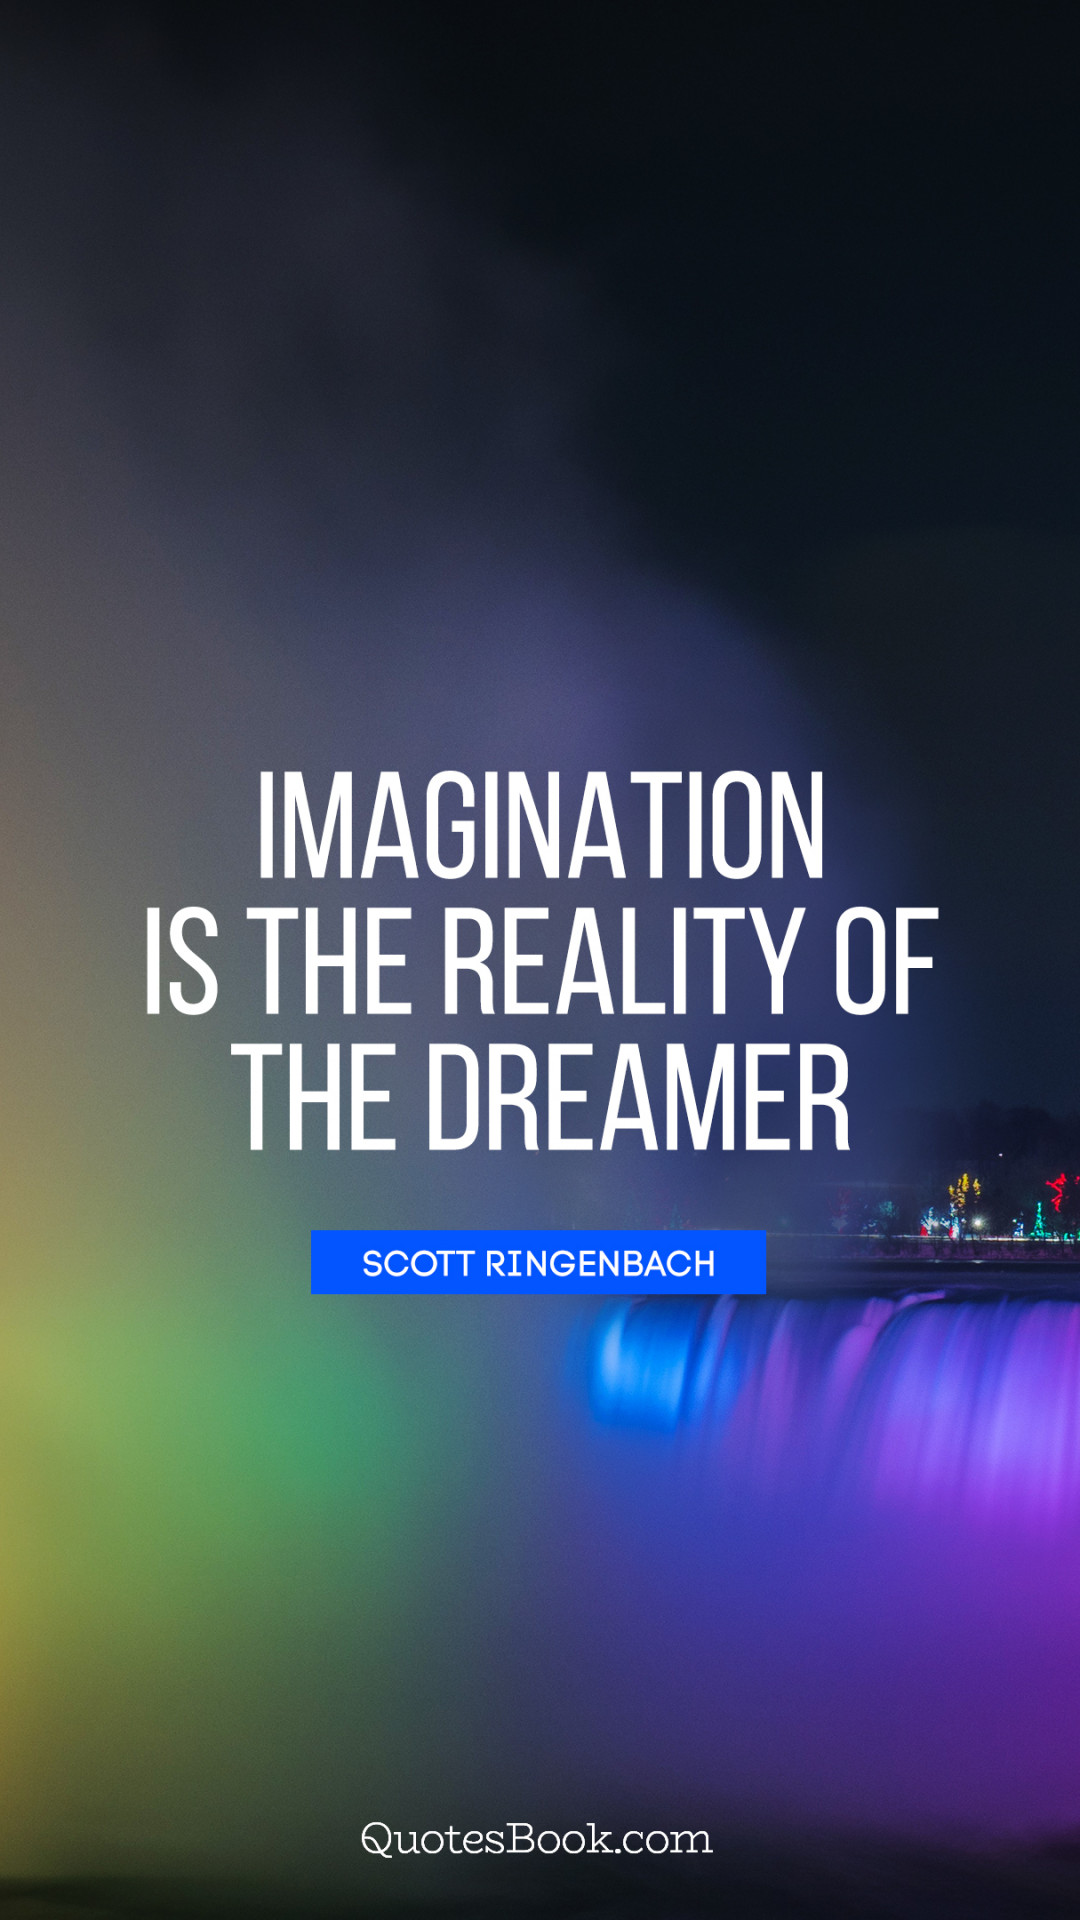 Imagination is the reality of the dreamer. - Quote by Scott Ringenbach